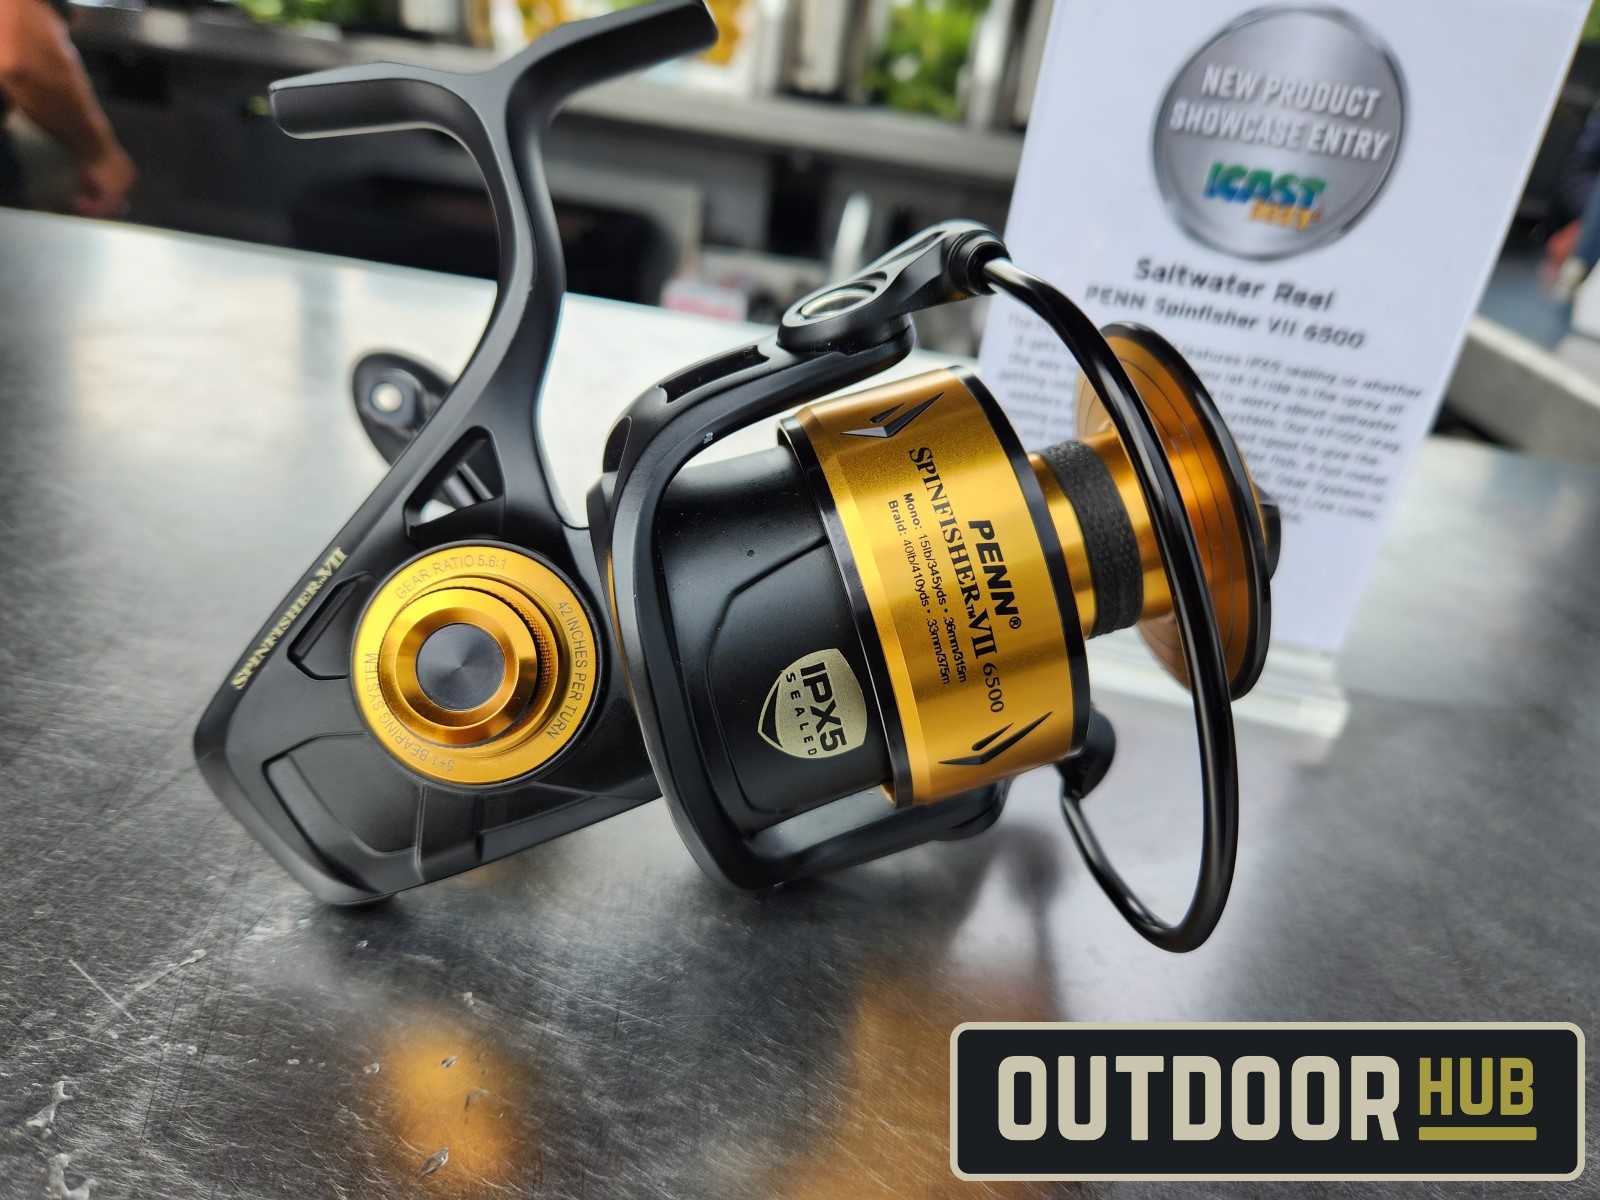 (ICAST 2023) The Spinfisher VII - The Next Gen of Spinfisher from PENN